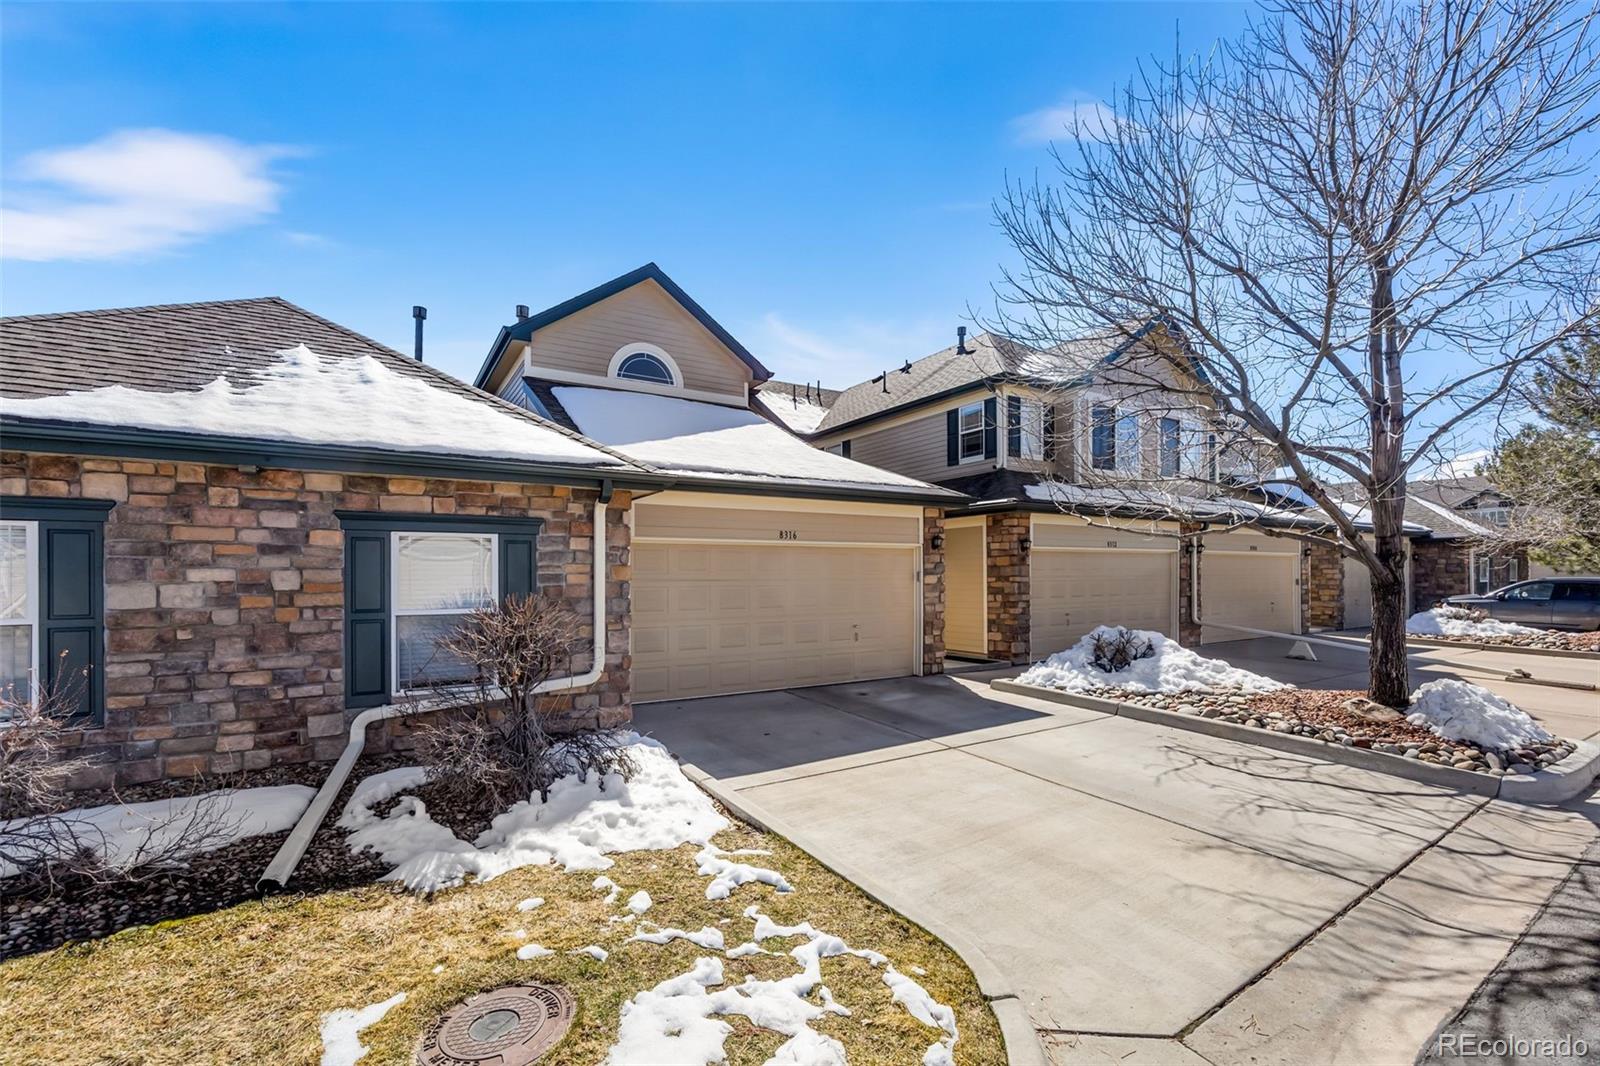 8316 s garland circle, littleton sold home. Closed on 2024-04-30 for $501,000.